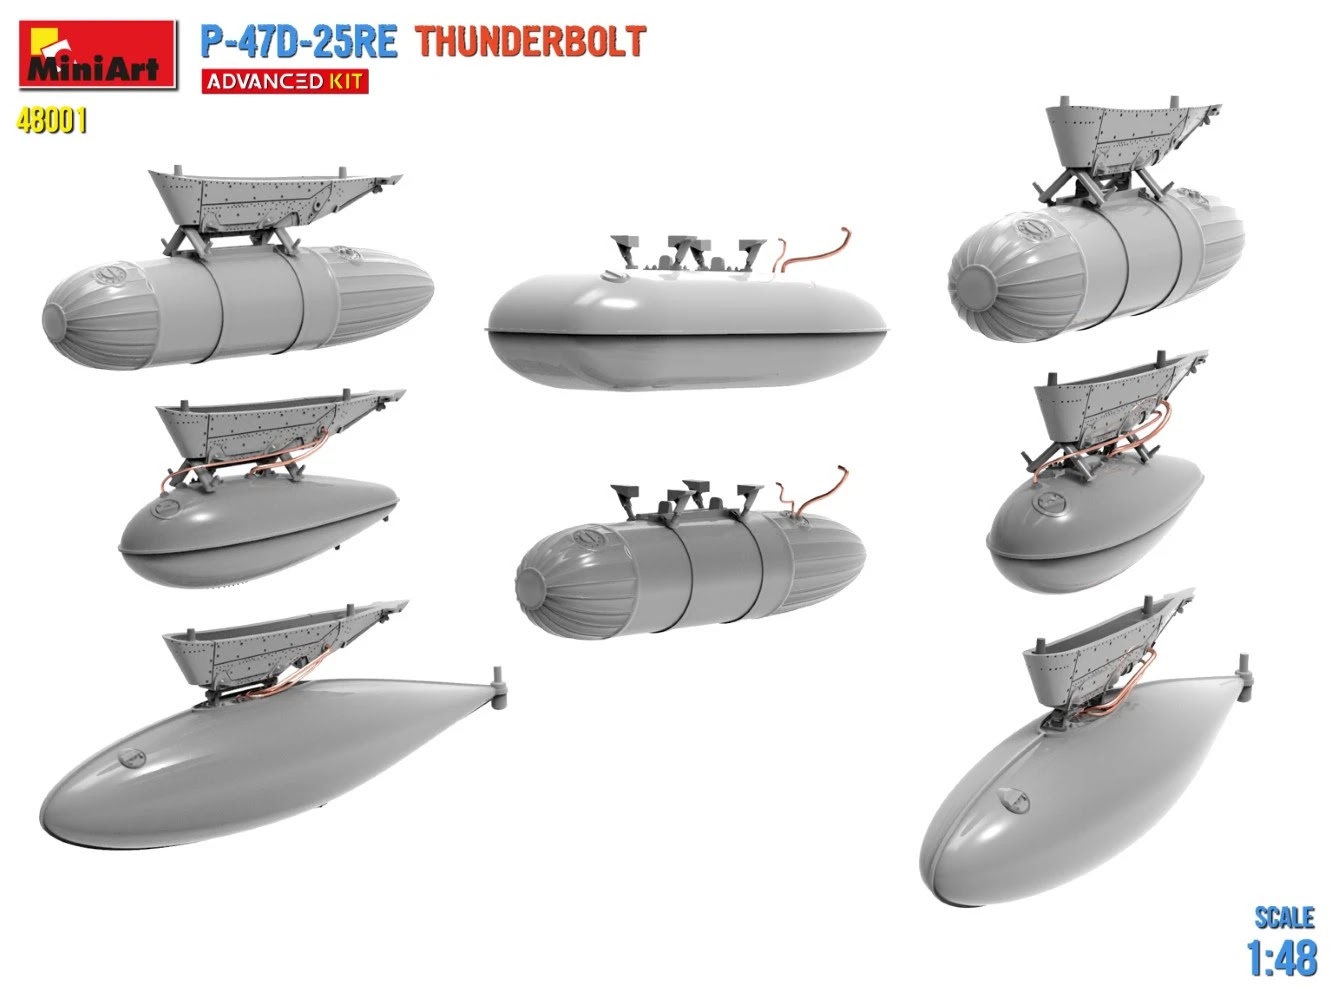 MiniArt ups the detail on their P-47D CAD Gasoline Tanks